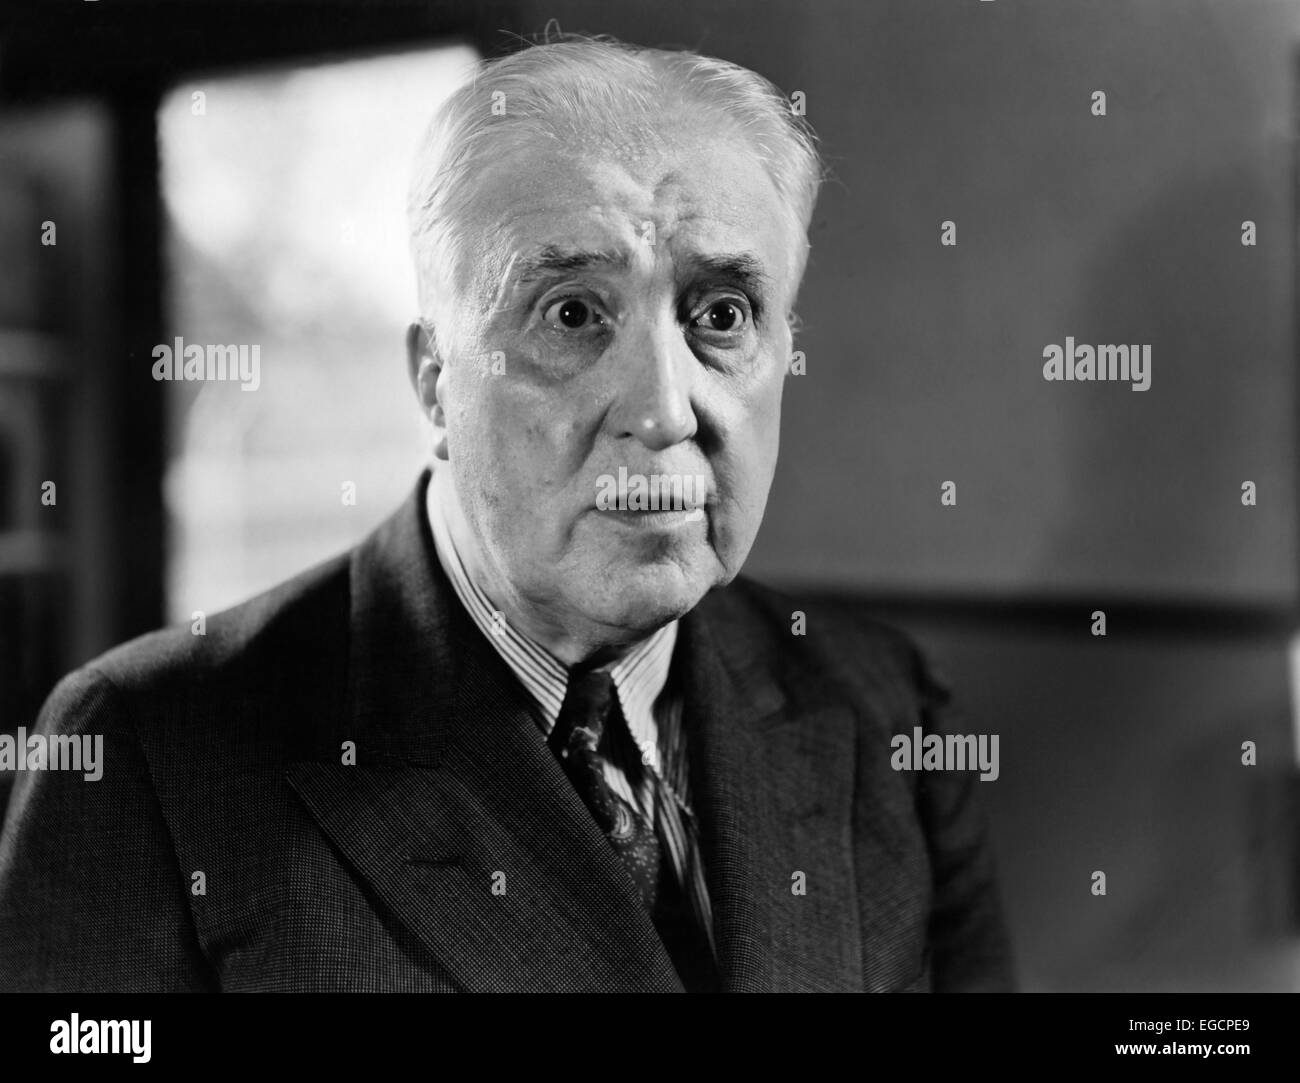 1940s 1950s PORTRAIT OLDER MATURE MAN IN SUIT WITH TIE CONCERNED STRESSED SAD EXPRESSION EYES WIDE OPEN STARE STARING Stock Photo